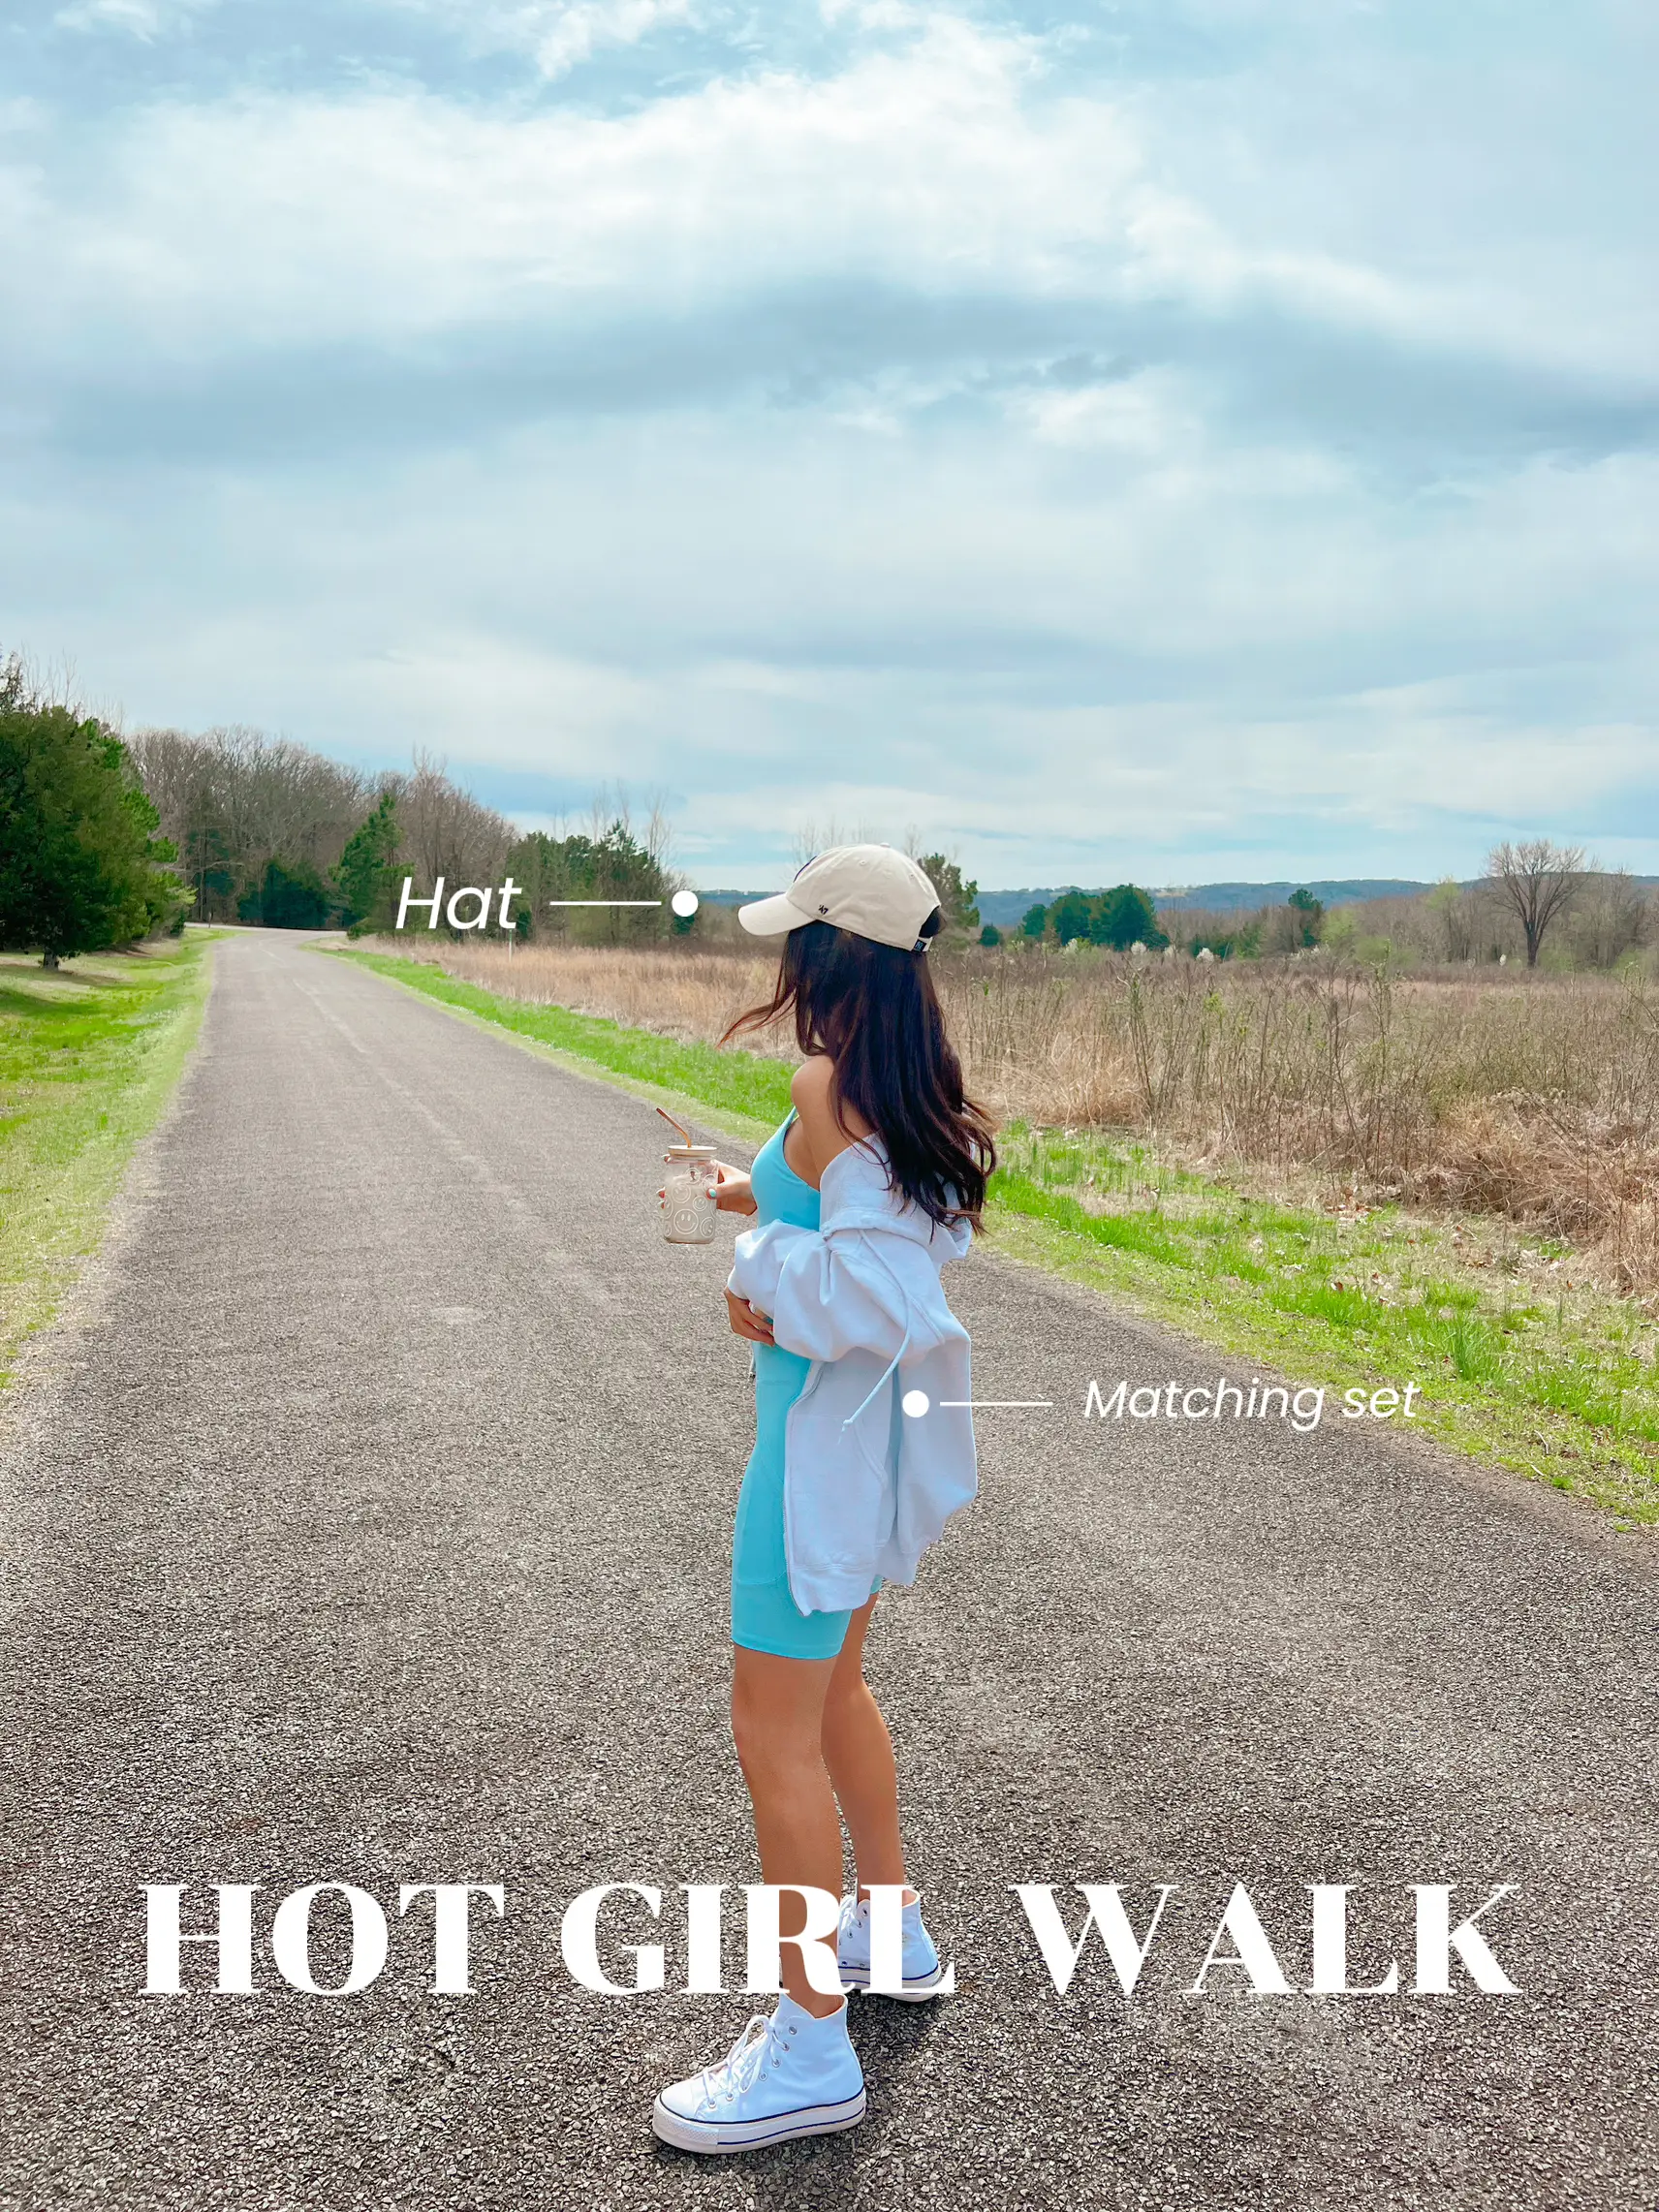  A woman wearing a white hat and a white shirt is walking down a road.